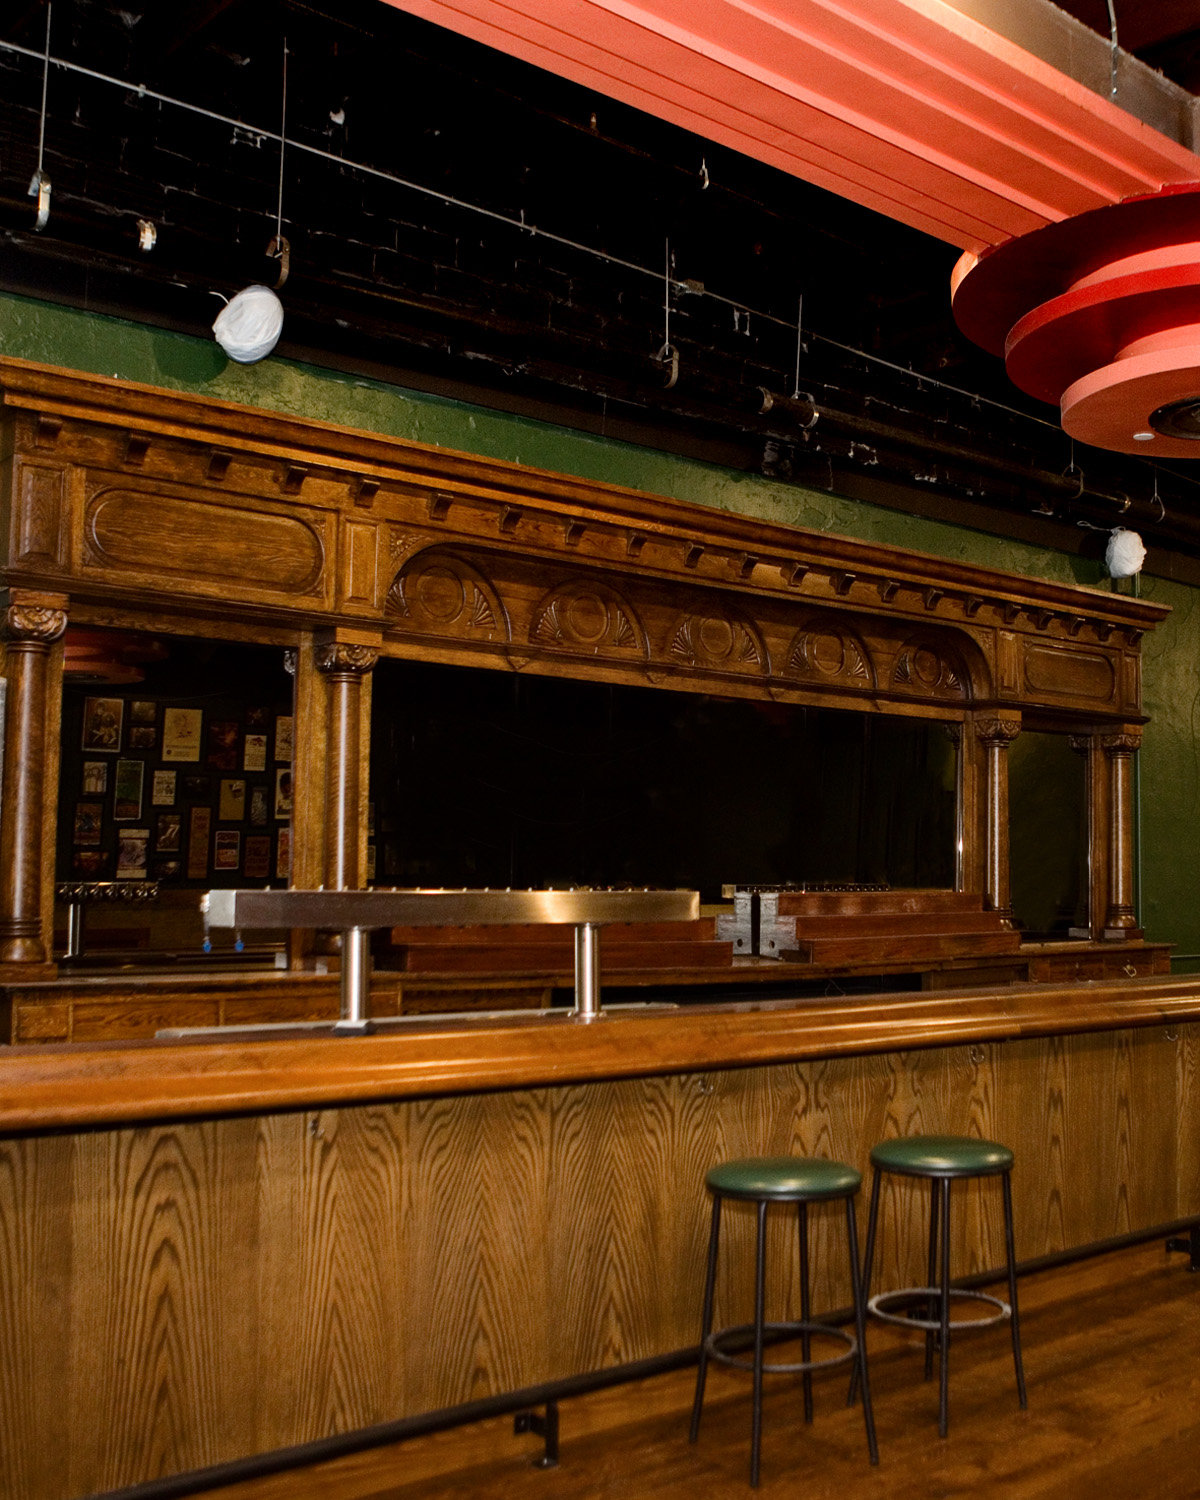 The interior, including the historic wooden bar at the Turf Club (at right) has been restored following fire damage in May 2020. (Photo by Margie O’Loughlin)